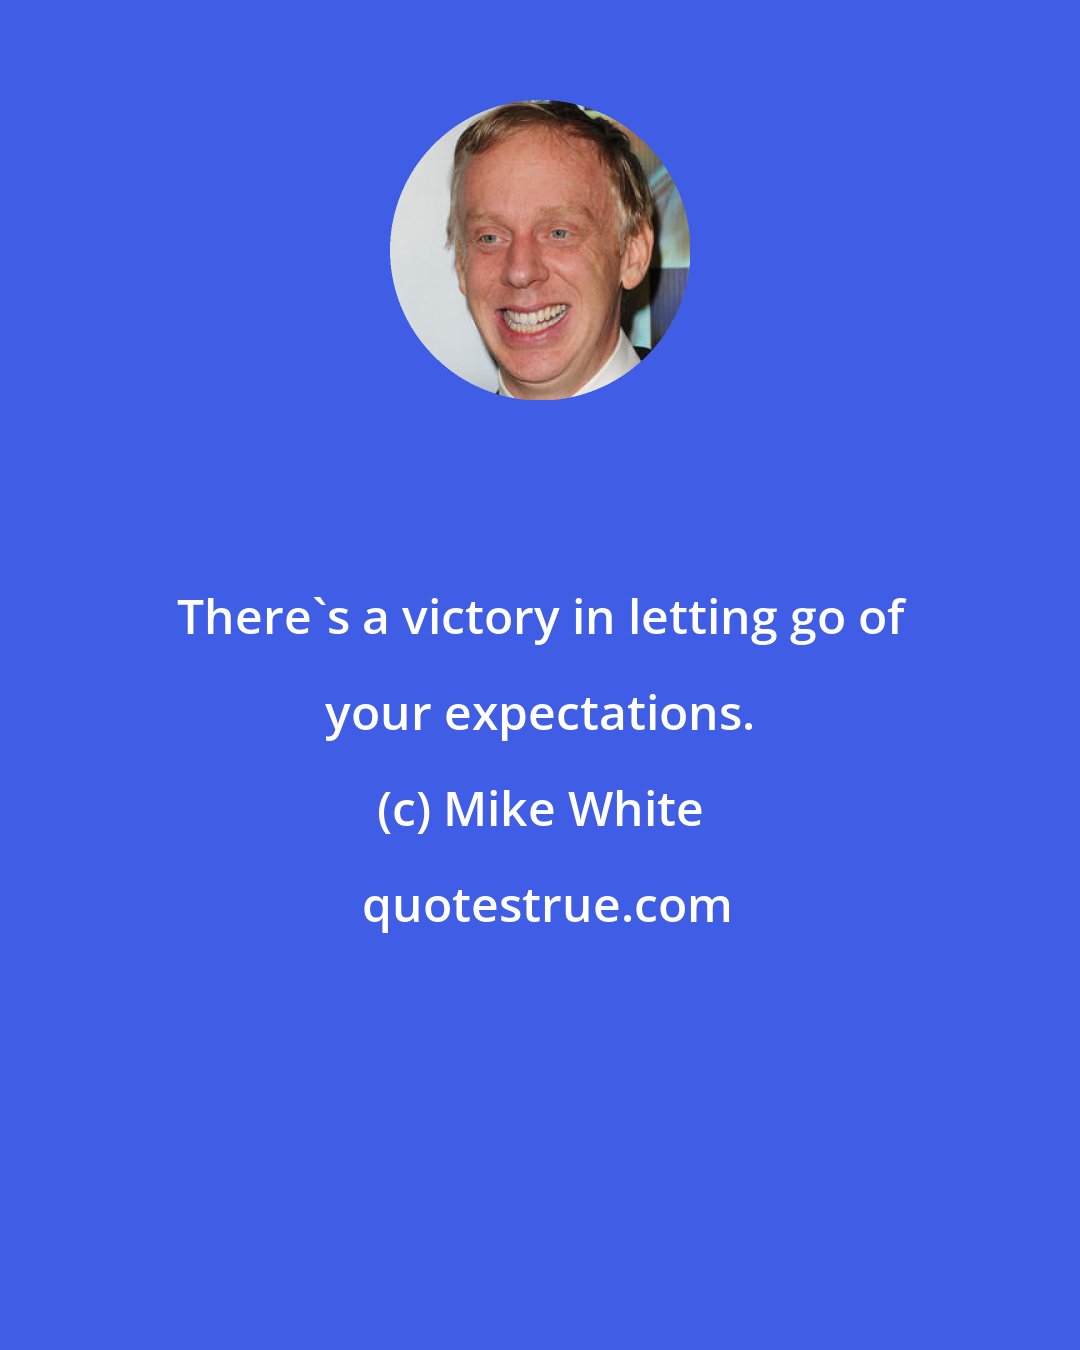 Mike White: There's a victory in letting go of your expectations.